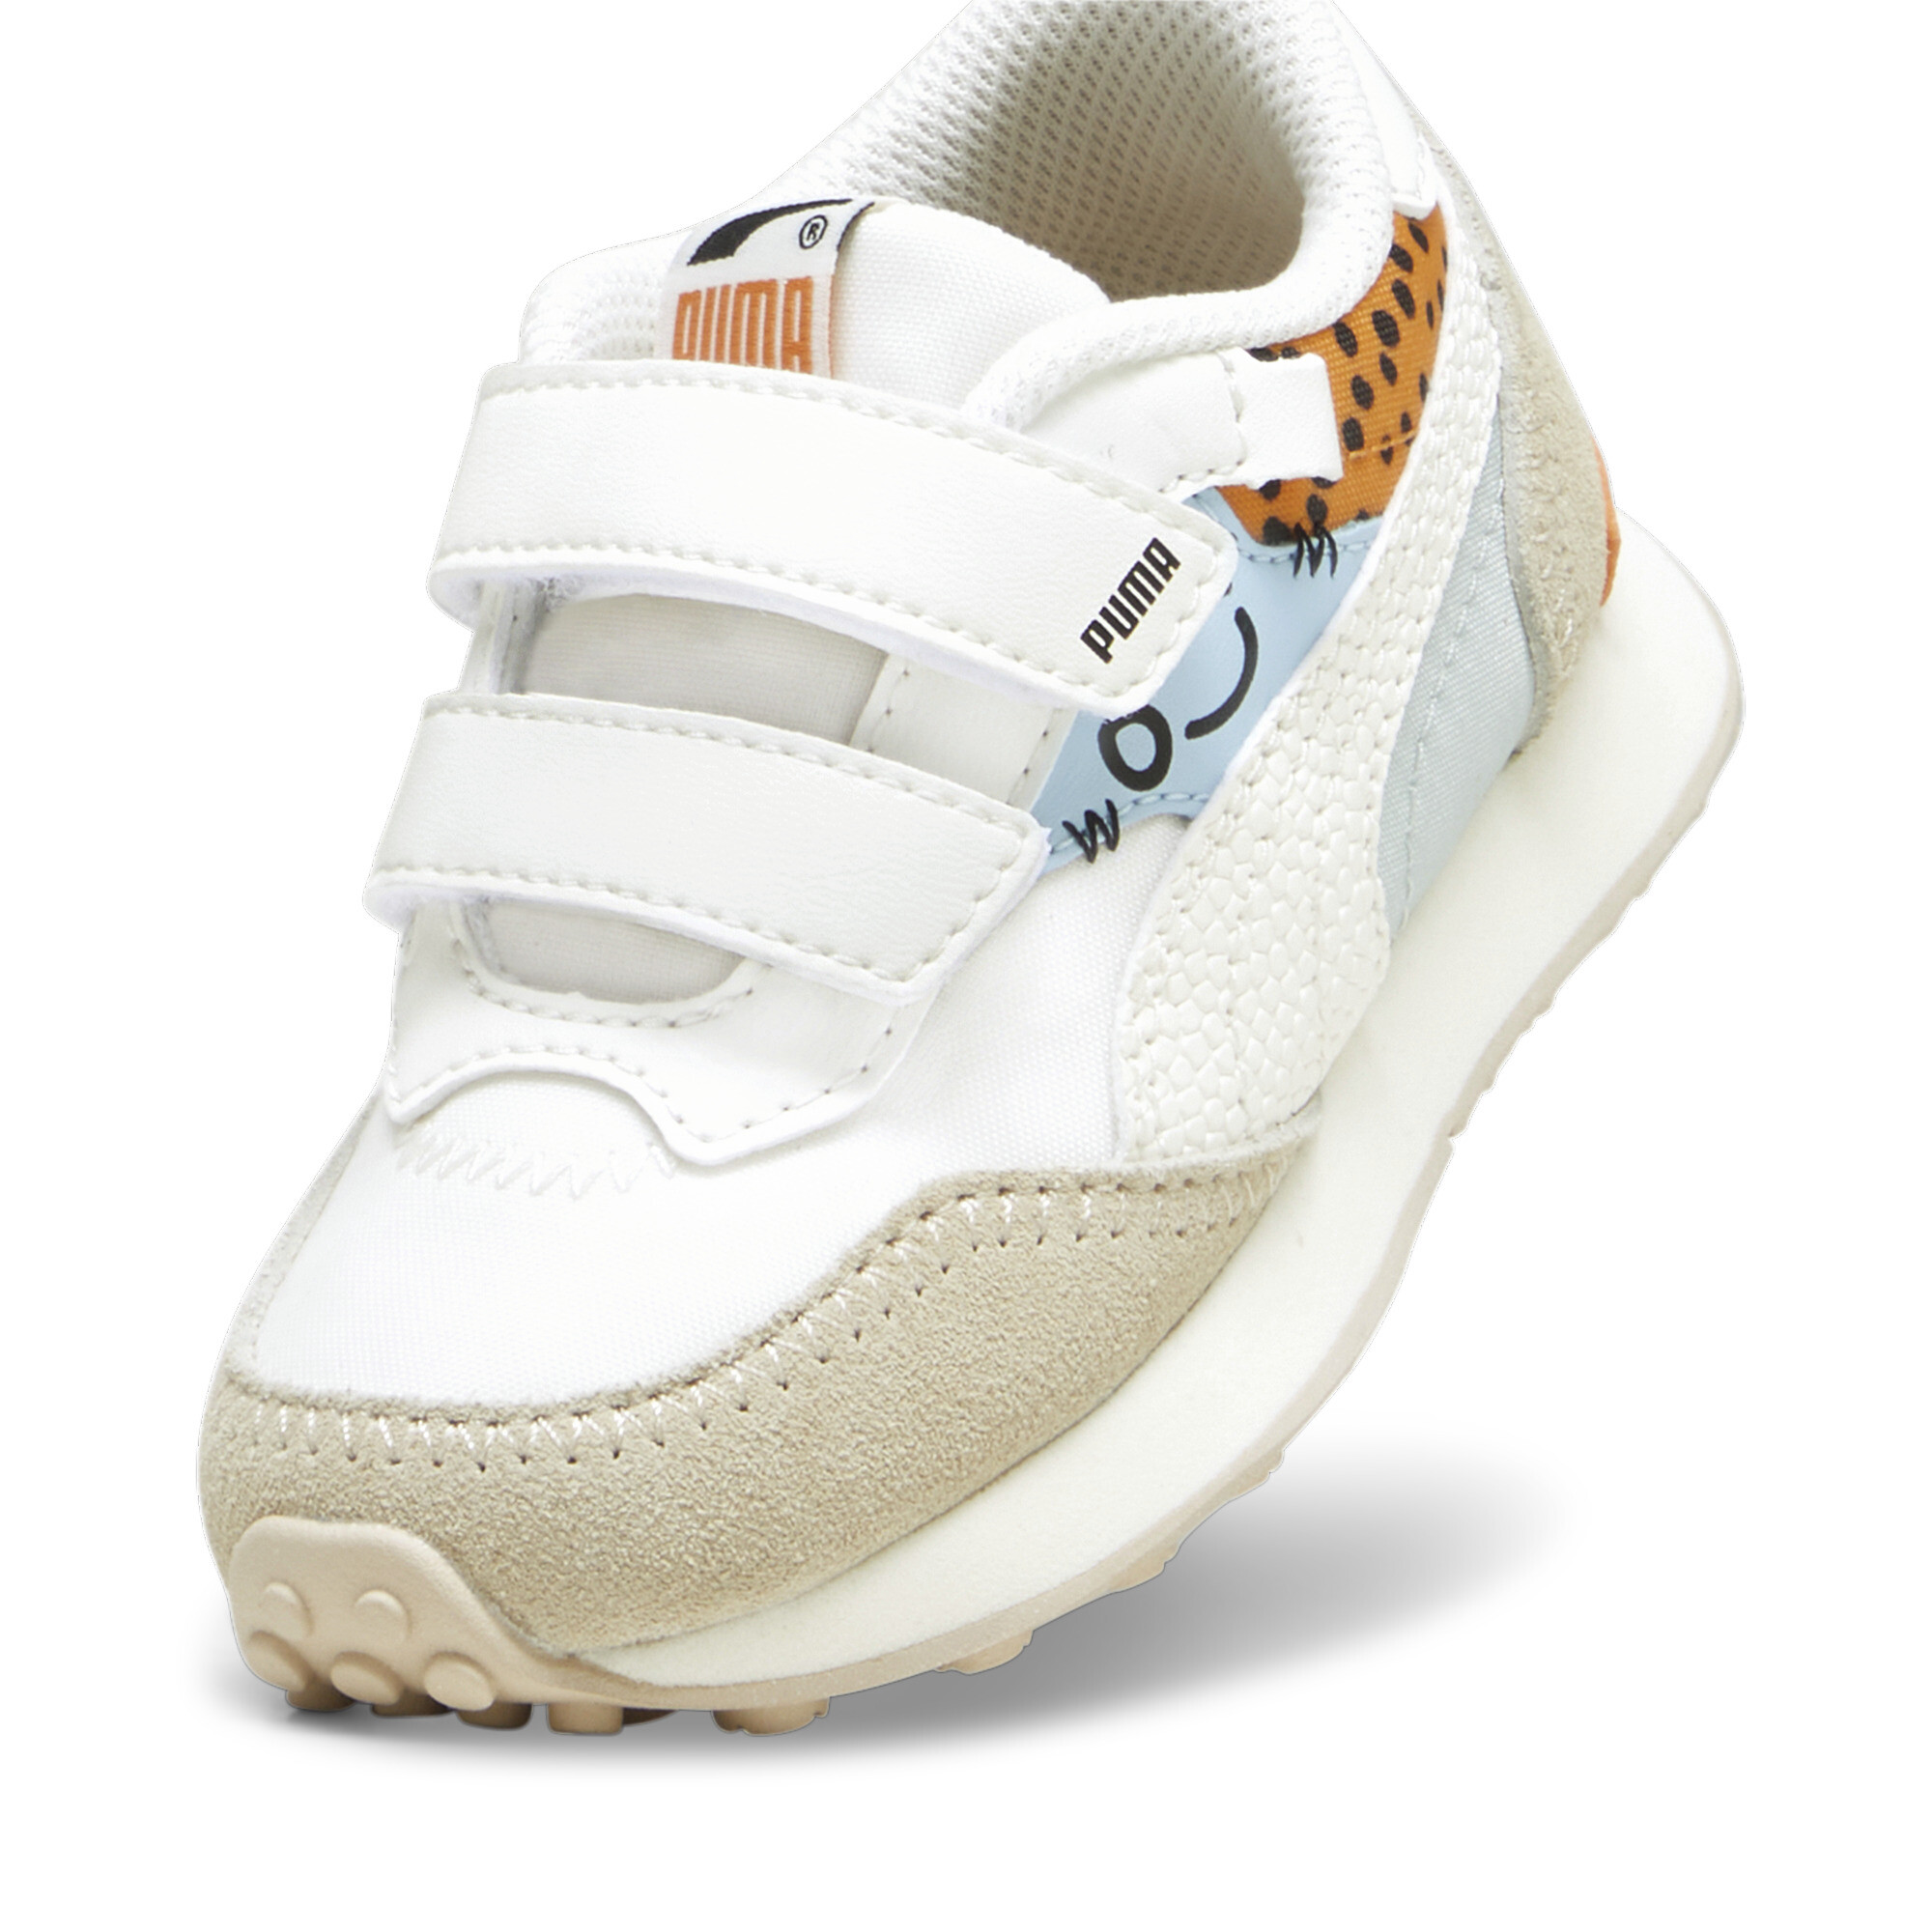 Kids' PUMA Rider FV Mix Match Toddlers' Sneakers In 20 - White, Size EU 24